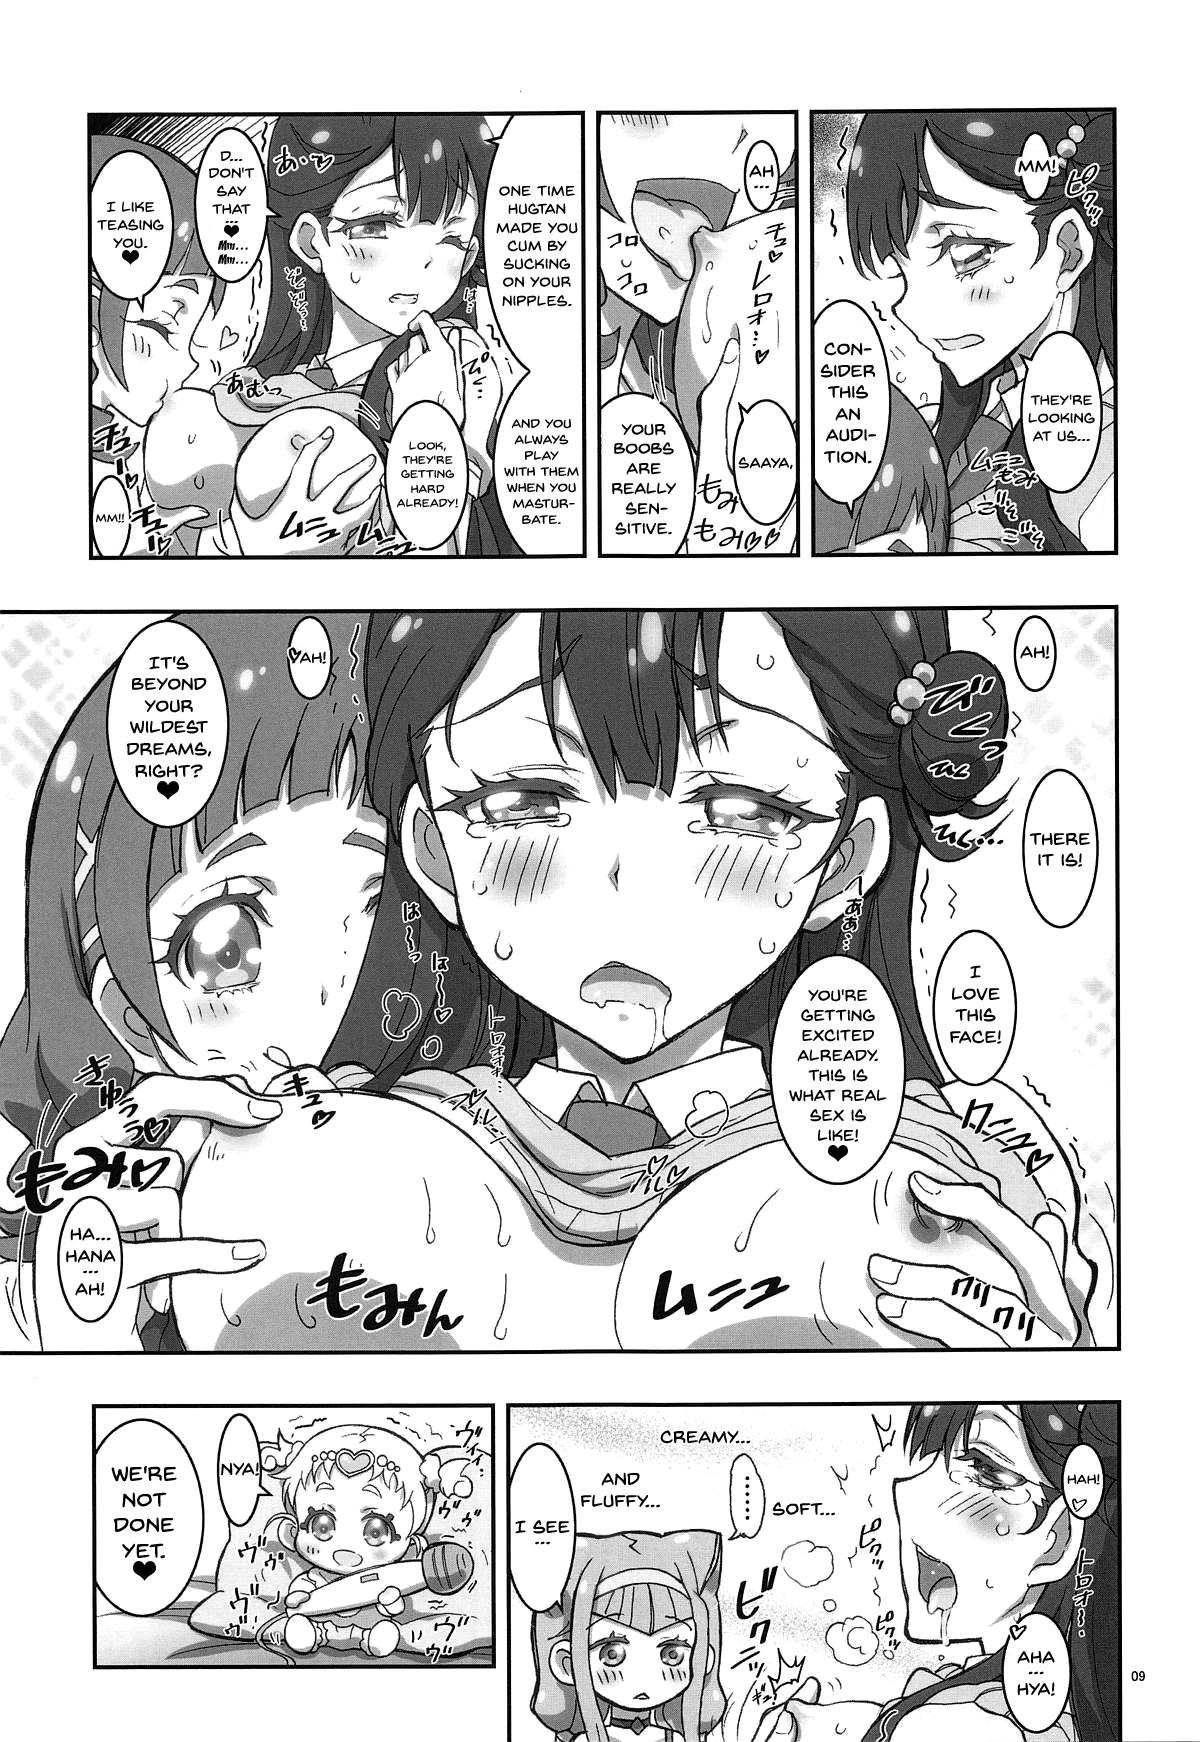 Pussy Fingering LOVE LOVE HUG HUG ANDROID - Hugtto precure Harcore - Page 8